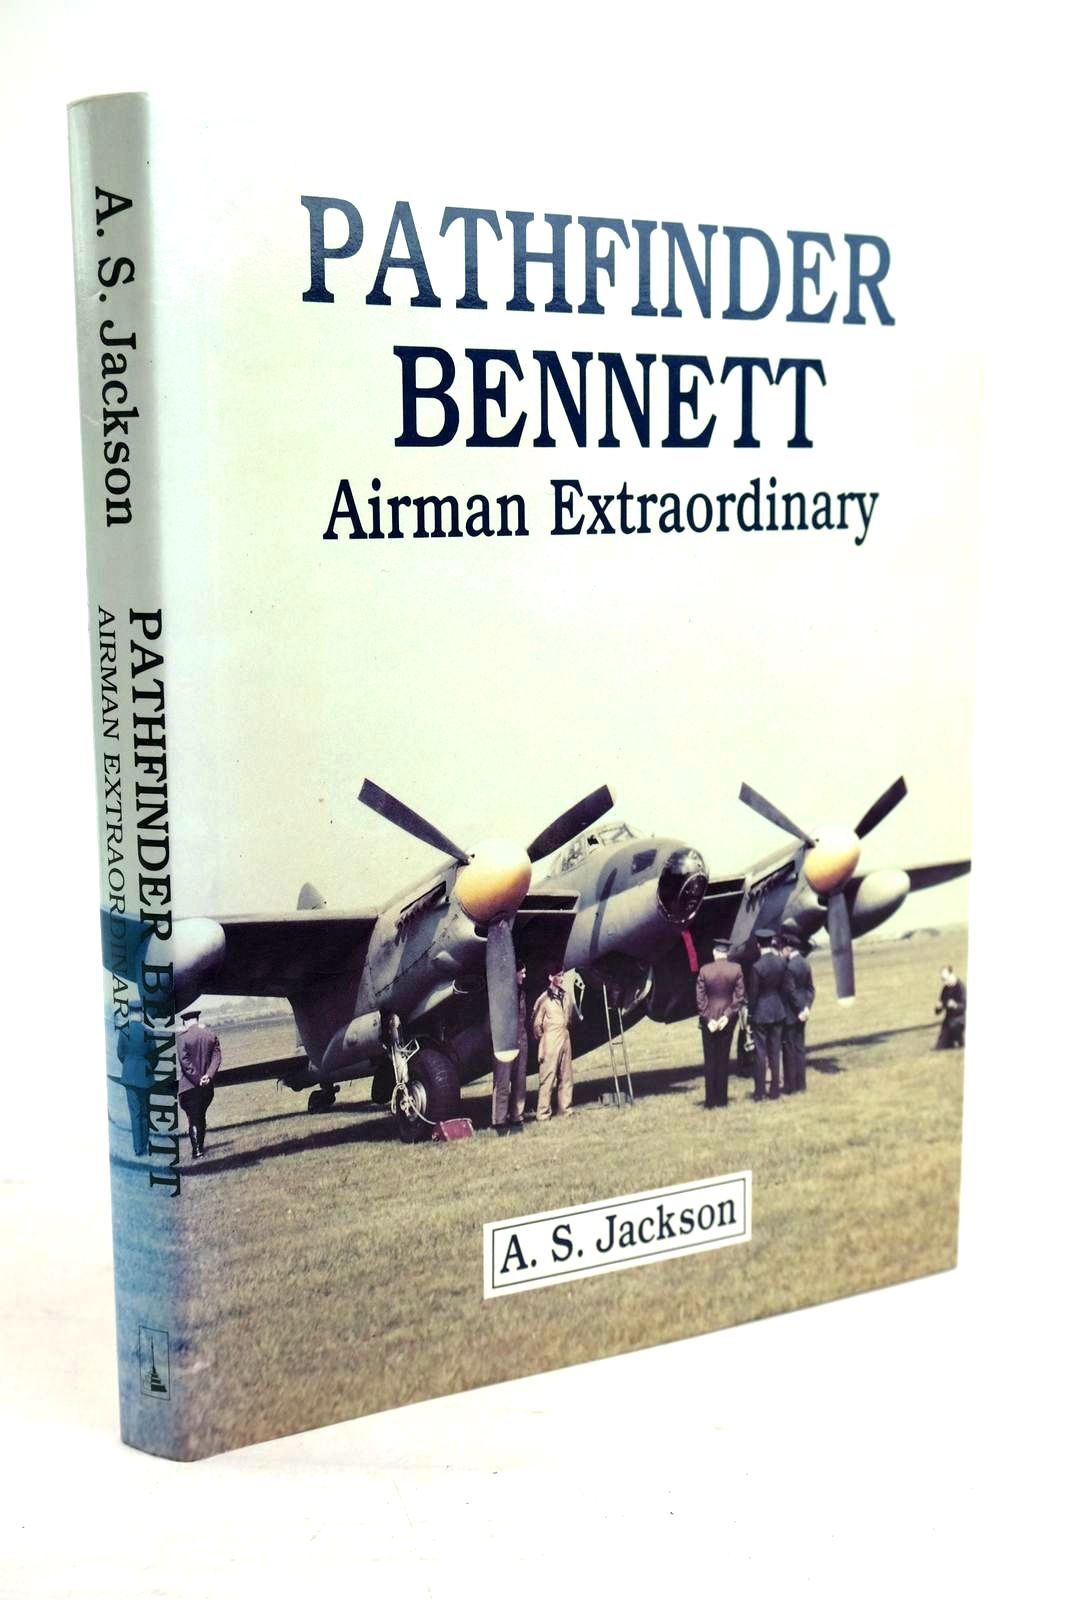 Photo of PATHFINDER BENNETT - AIRMAN EXTRAORDINARY written by Jackson, A.S. published by Terence Dalton Limited (STOCK CODE: 1320221)  for sale by Stella & Rose's Books